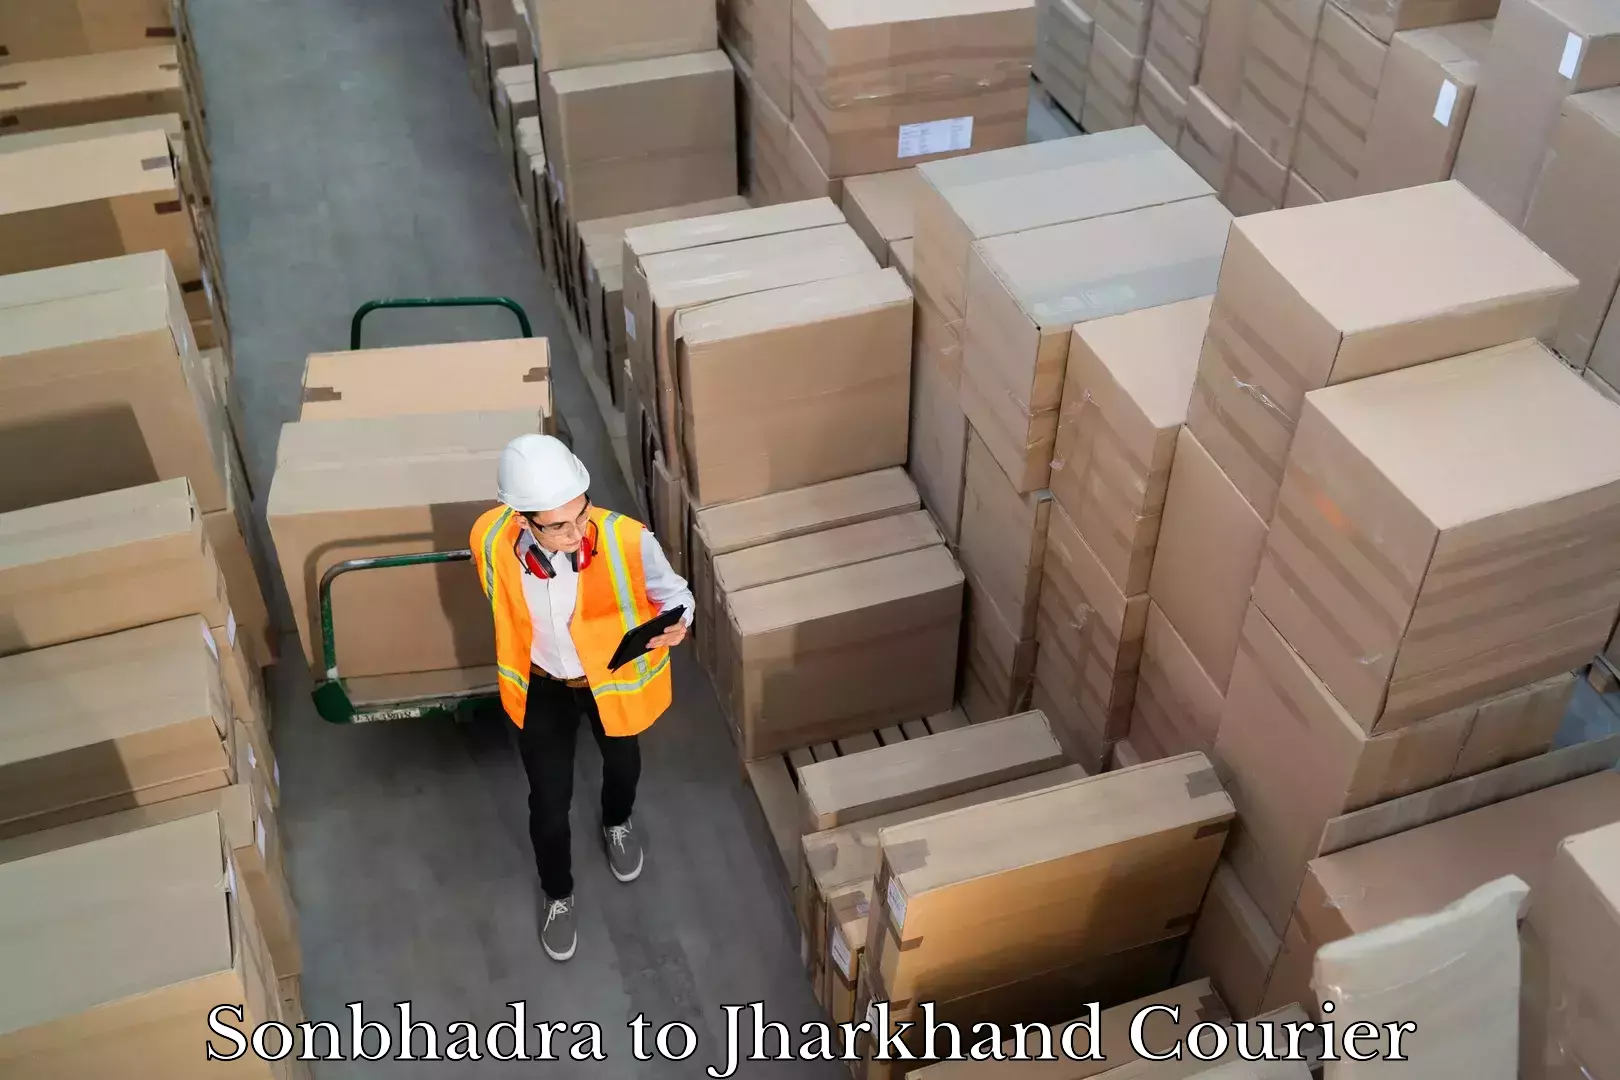 Global courier networks Sonbhadra to Jharkhand